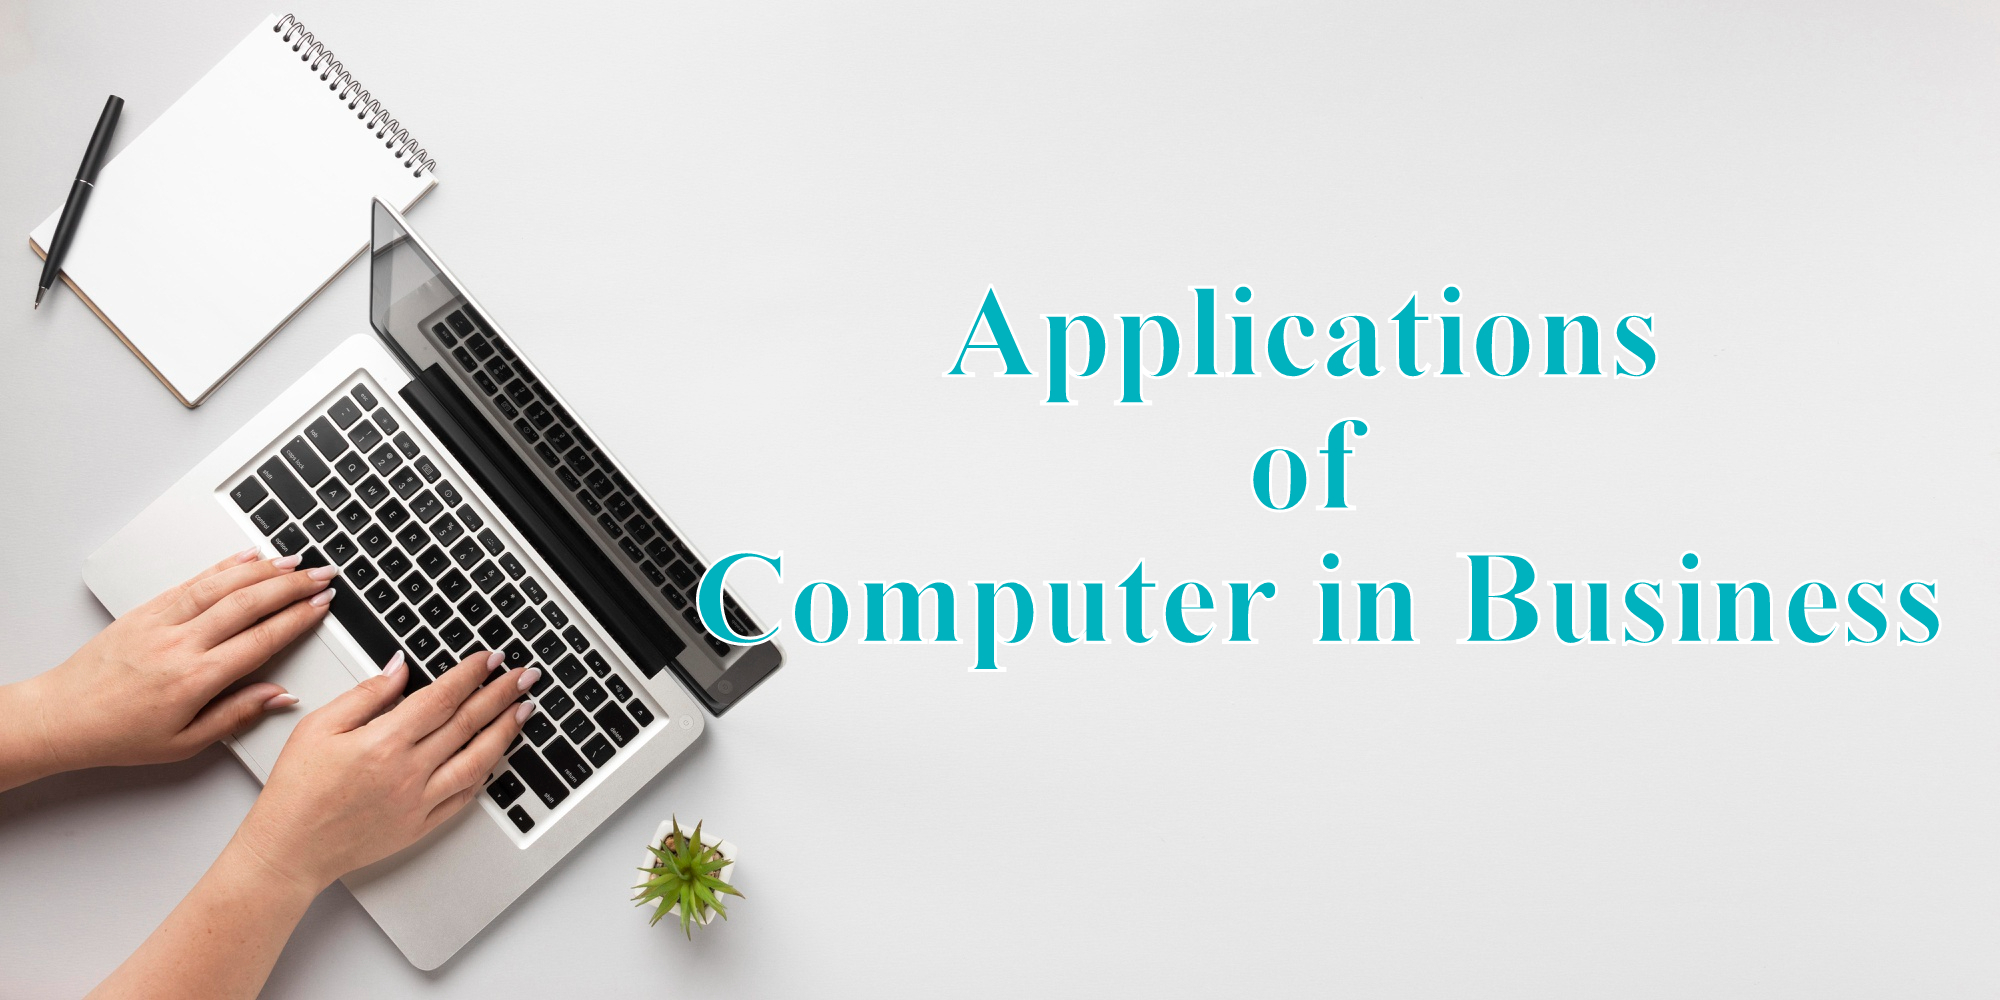 Uses of computer in business